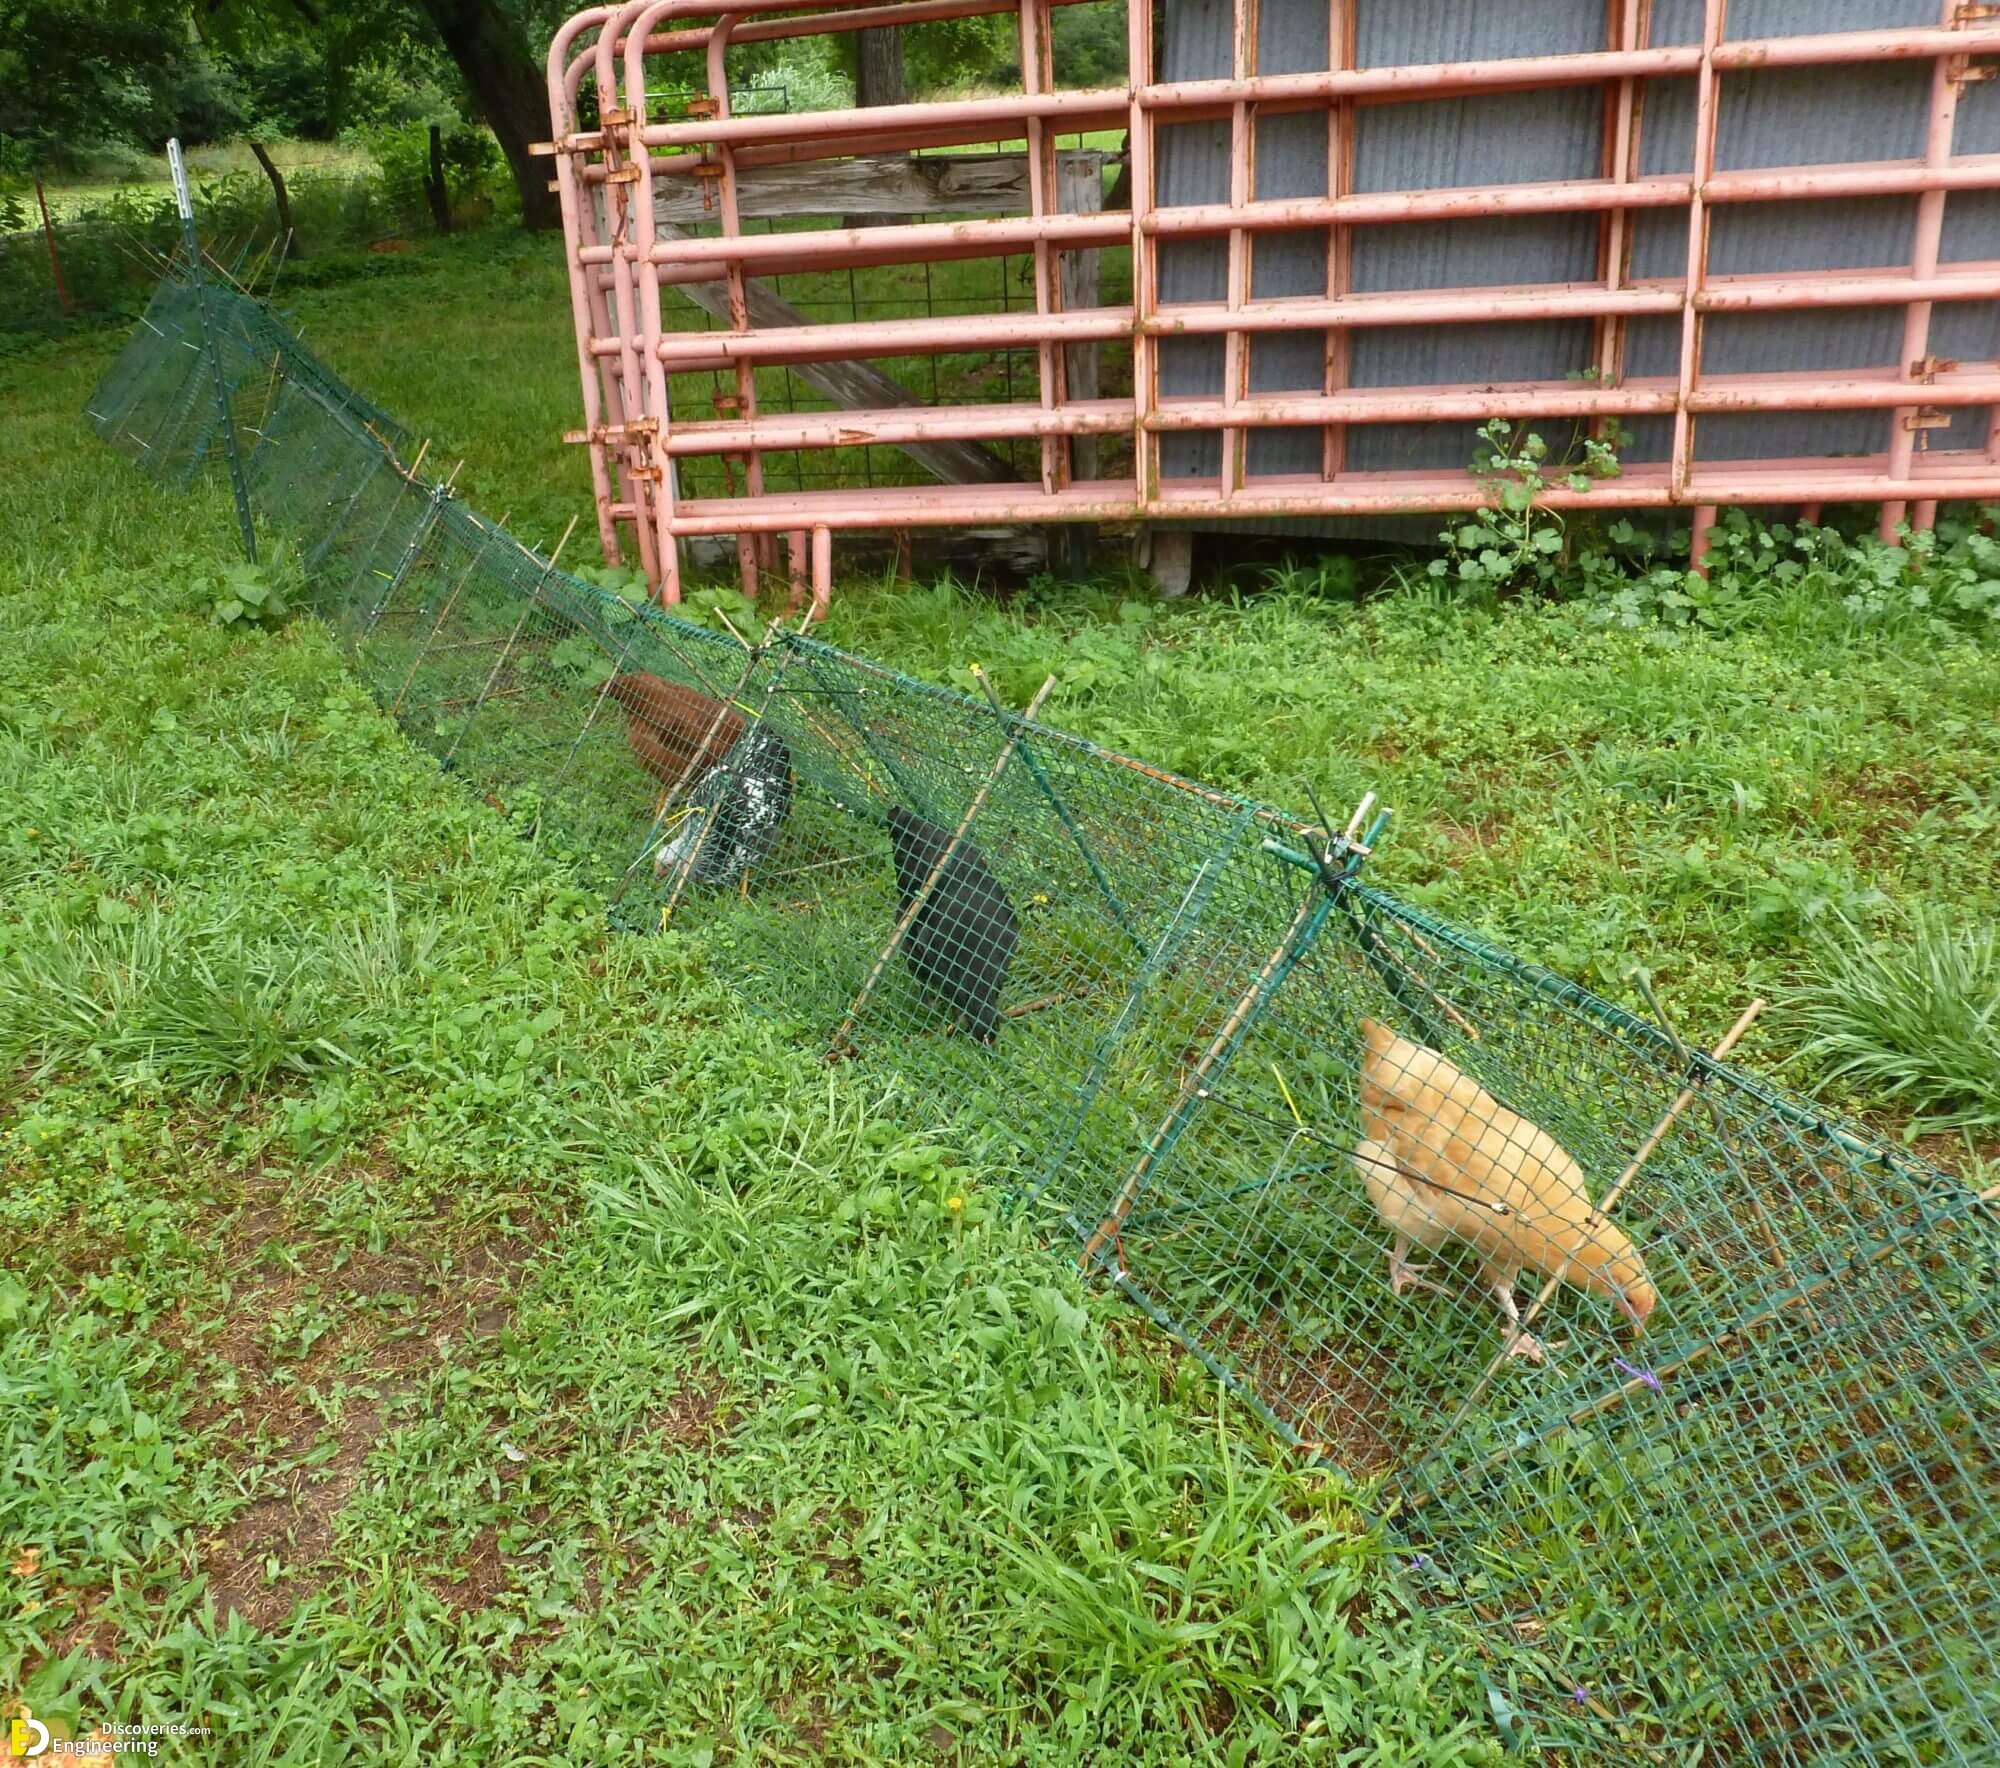 Chicken wire nowhere to be found amid surge in DIY food production